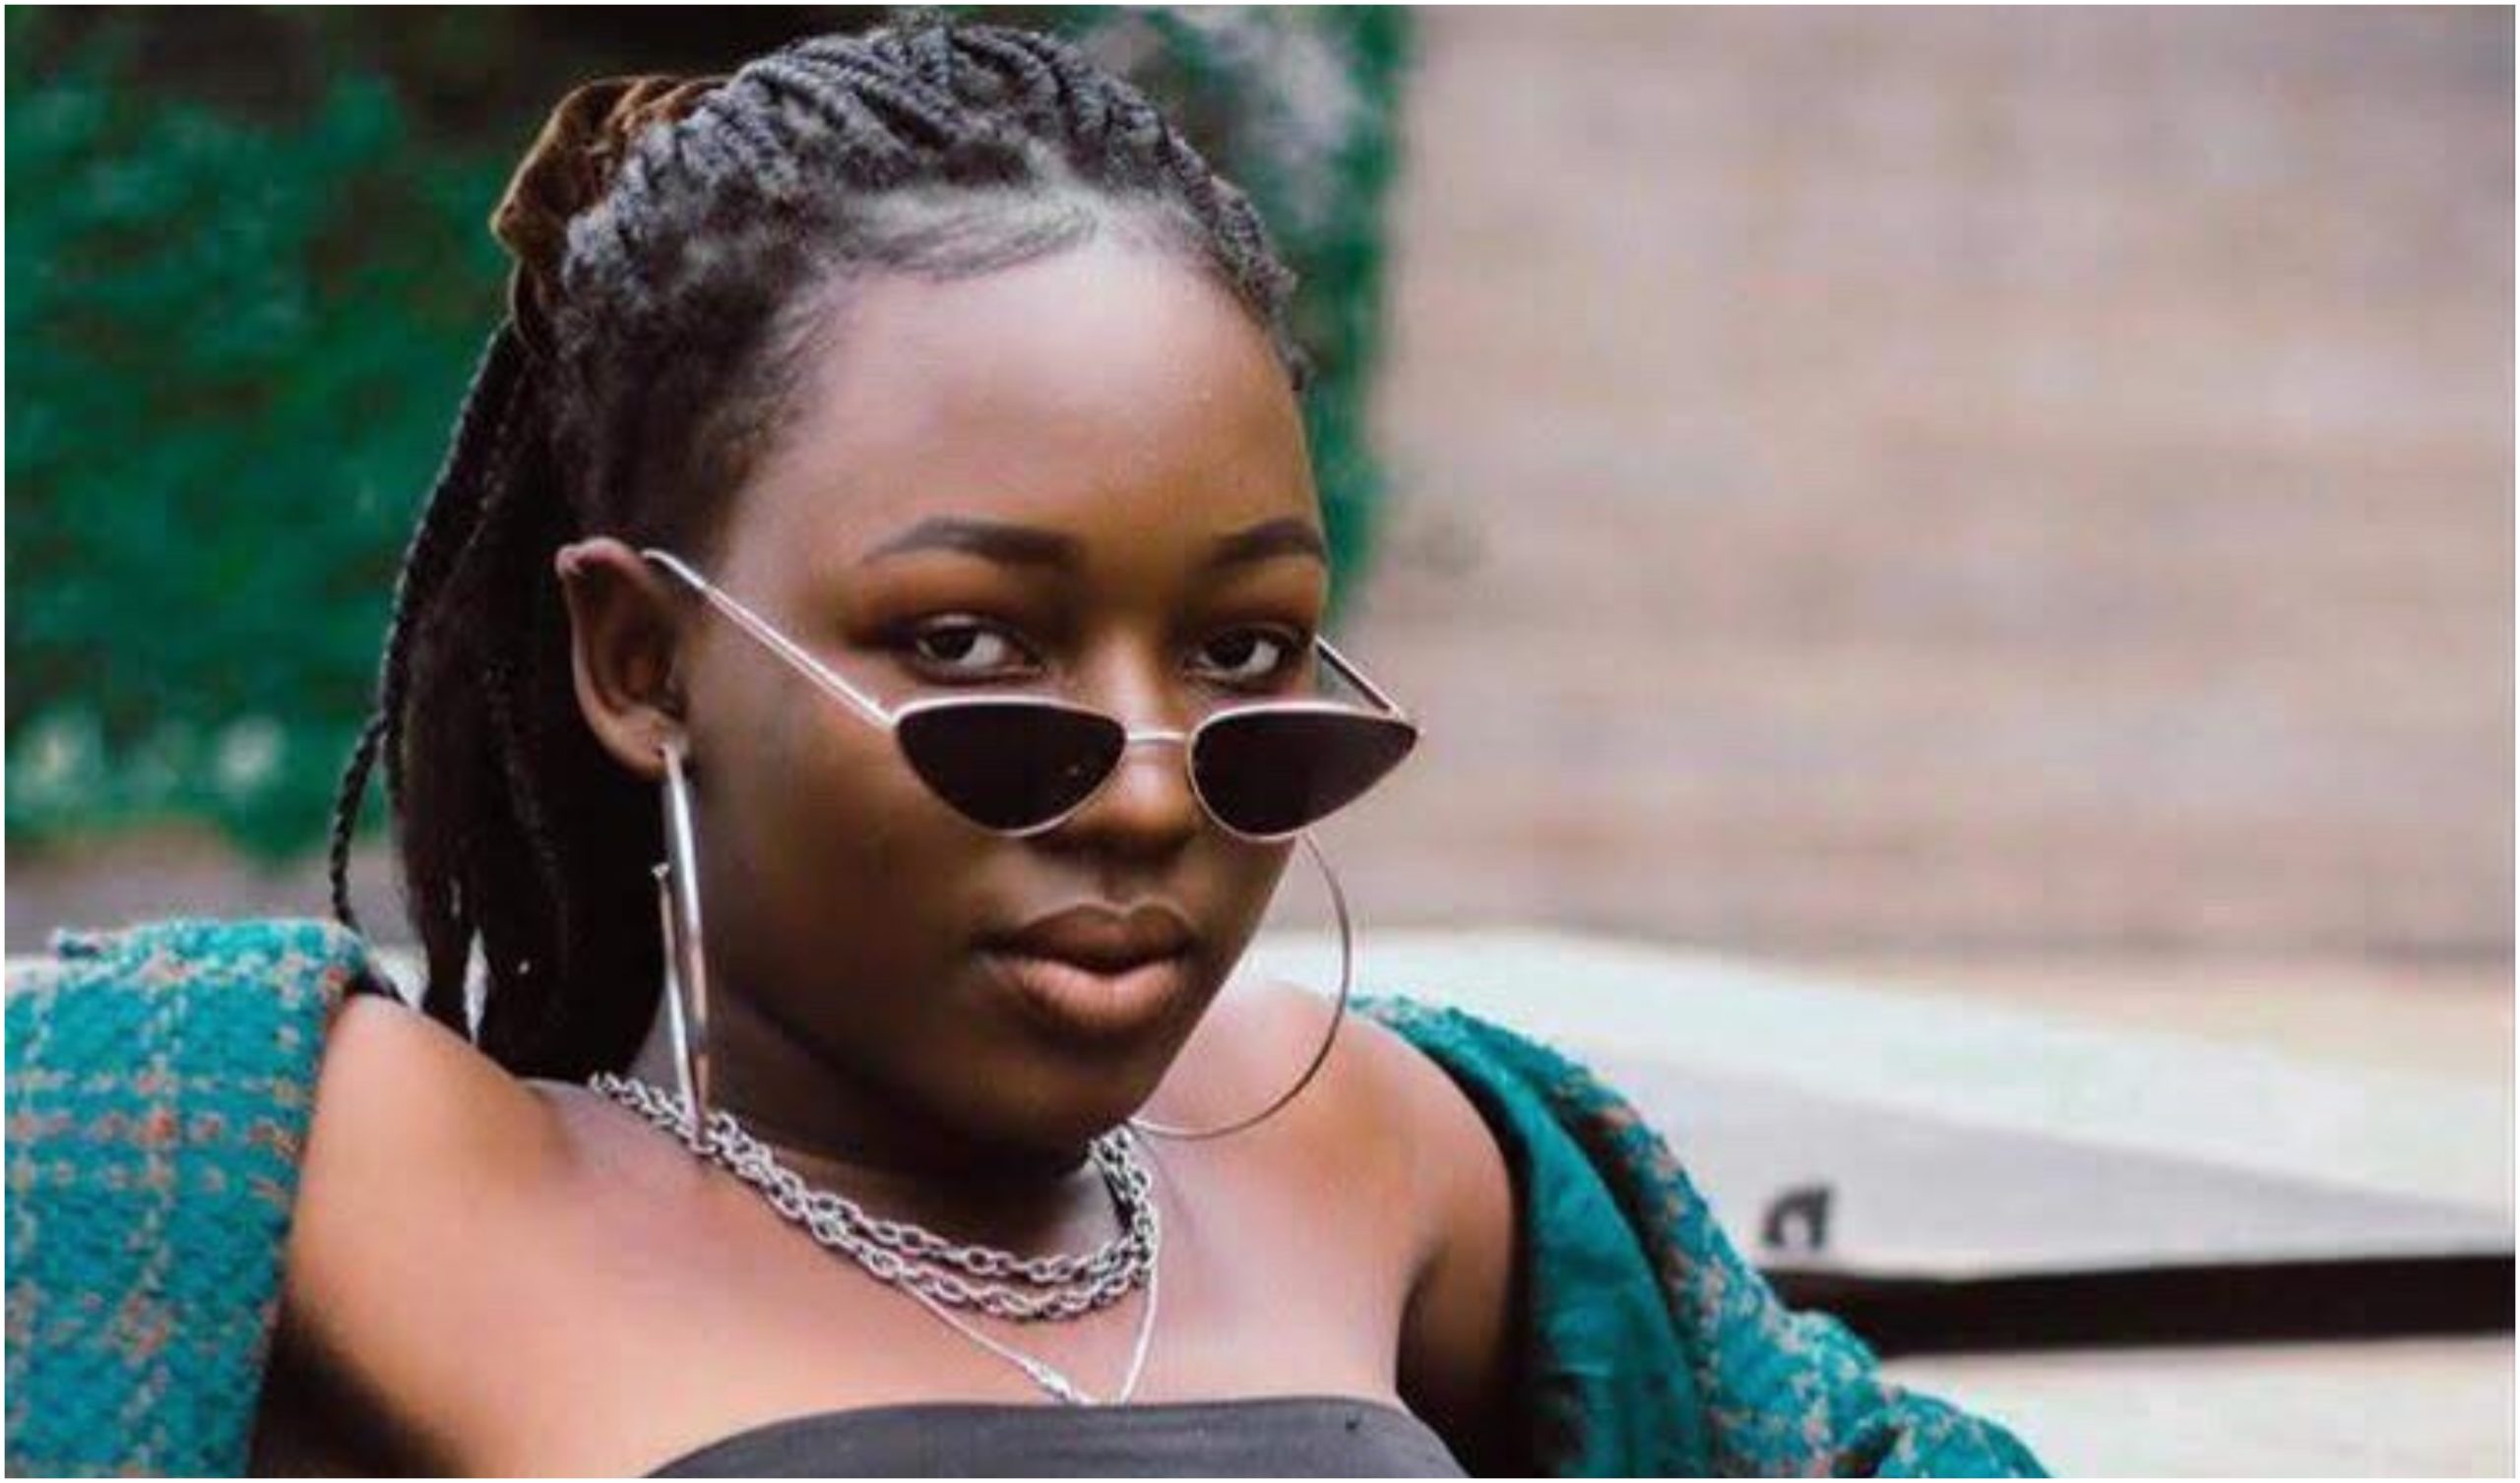 Lanes! Elsa Majimbo flaunts the special package gifted to her by singer Beyoncé (Video)